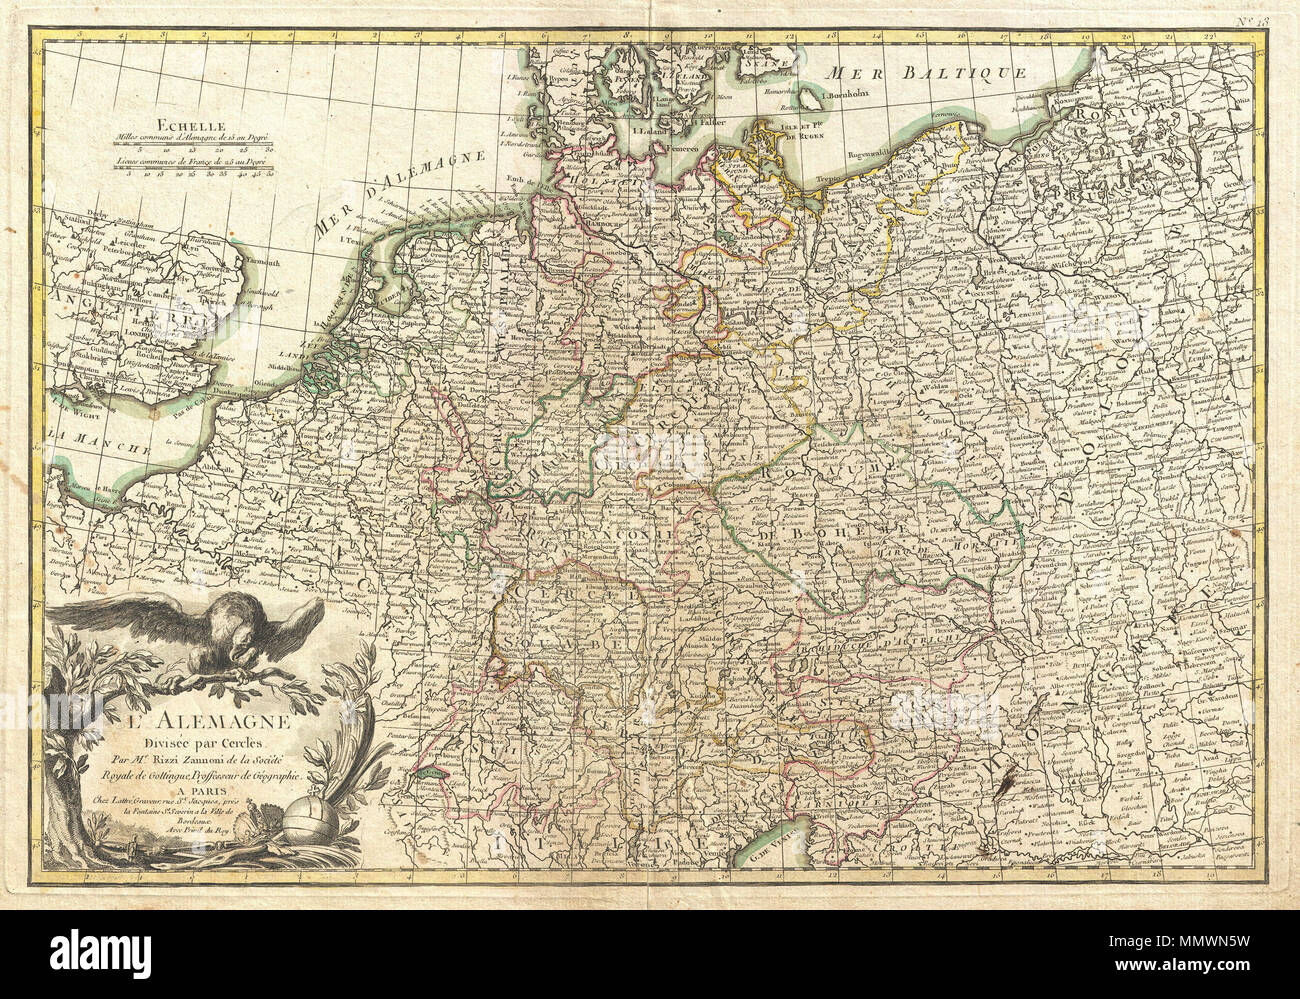 .  English: A beautiful example of Rizzi-Zannoni's decorative map of Germany. Covers from Jutland to the Gulf of Venice and from England to Poland.. Offers excellent detail throughout showing mountains, rivers, forests, national boundaries, regional boundaries, forts, and cities. A large decorative title cartouche depicting the Eagle of Deutschland appears in the lower left quadrant. Drawn by Rizzi-Zannon in 1762 for issue as plate no. 13 in Jean Lattre's 1776 edition of the Atlas Moderne .  L'Alemagne Divisee par Cercles.. 1771 (undated). 1771 Rizzi-Zannoni Map of Germany and Poland - Geograp Stock Photo